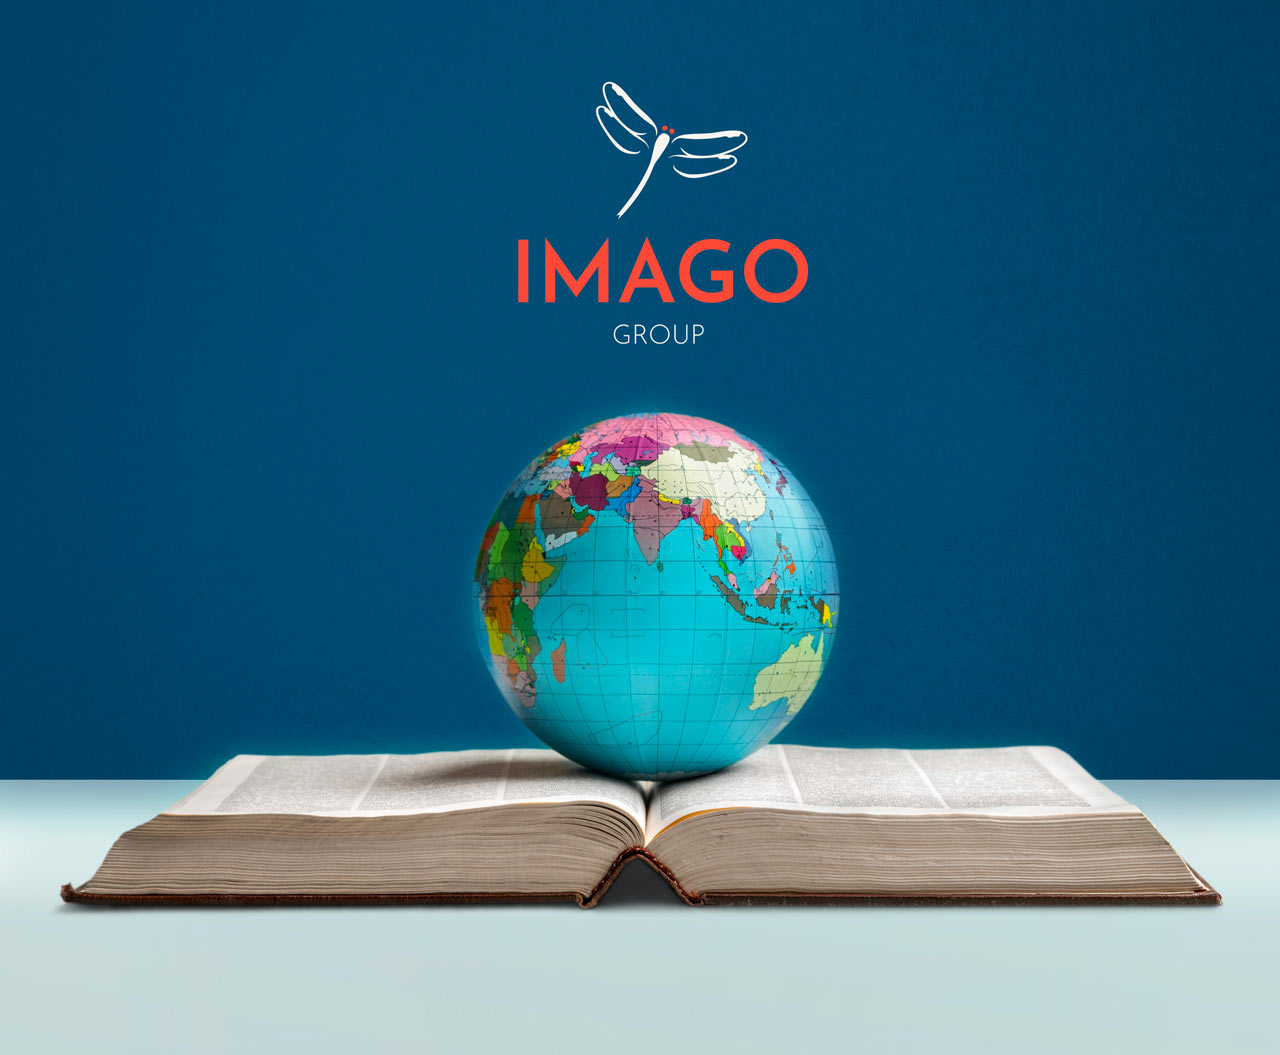 imago logo with globe and book open